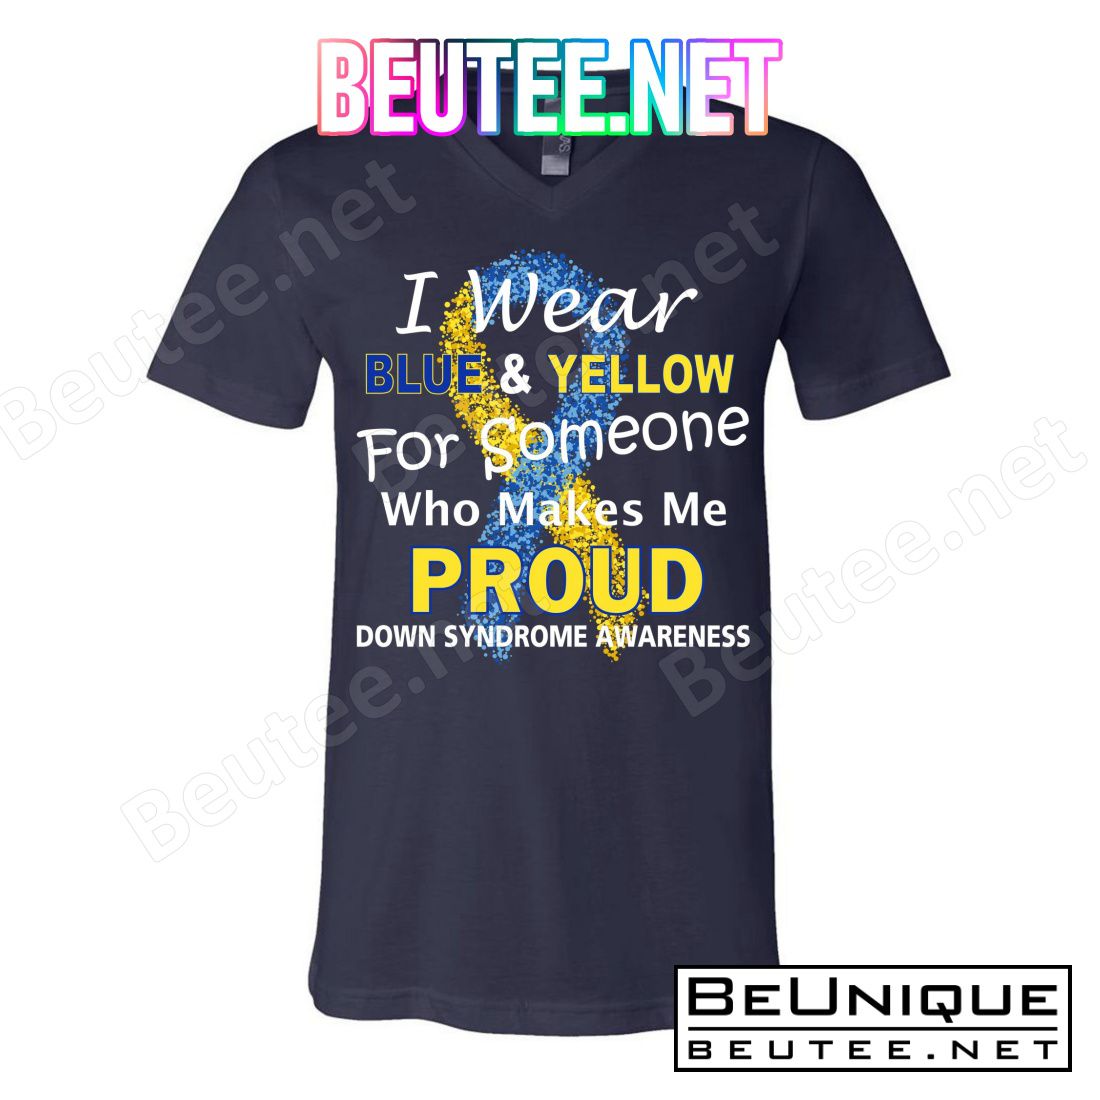 Down Syndrome Awareness Makes Me Proud T-Shirts